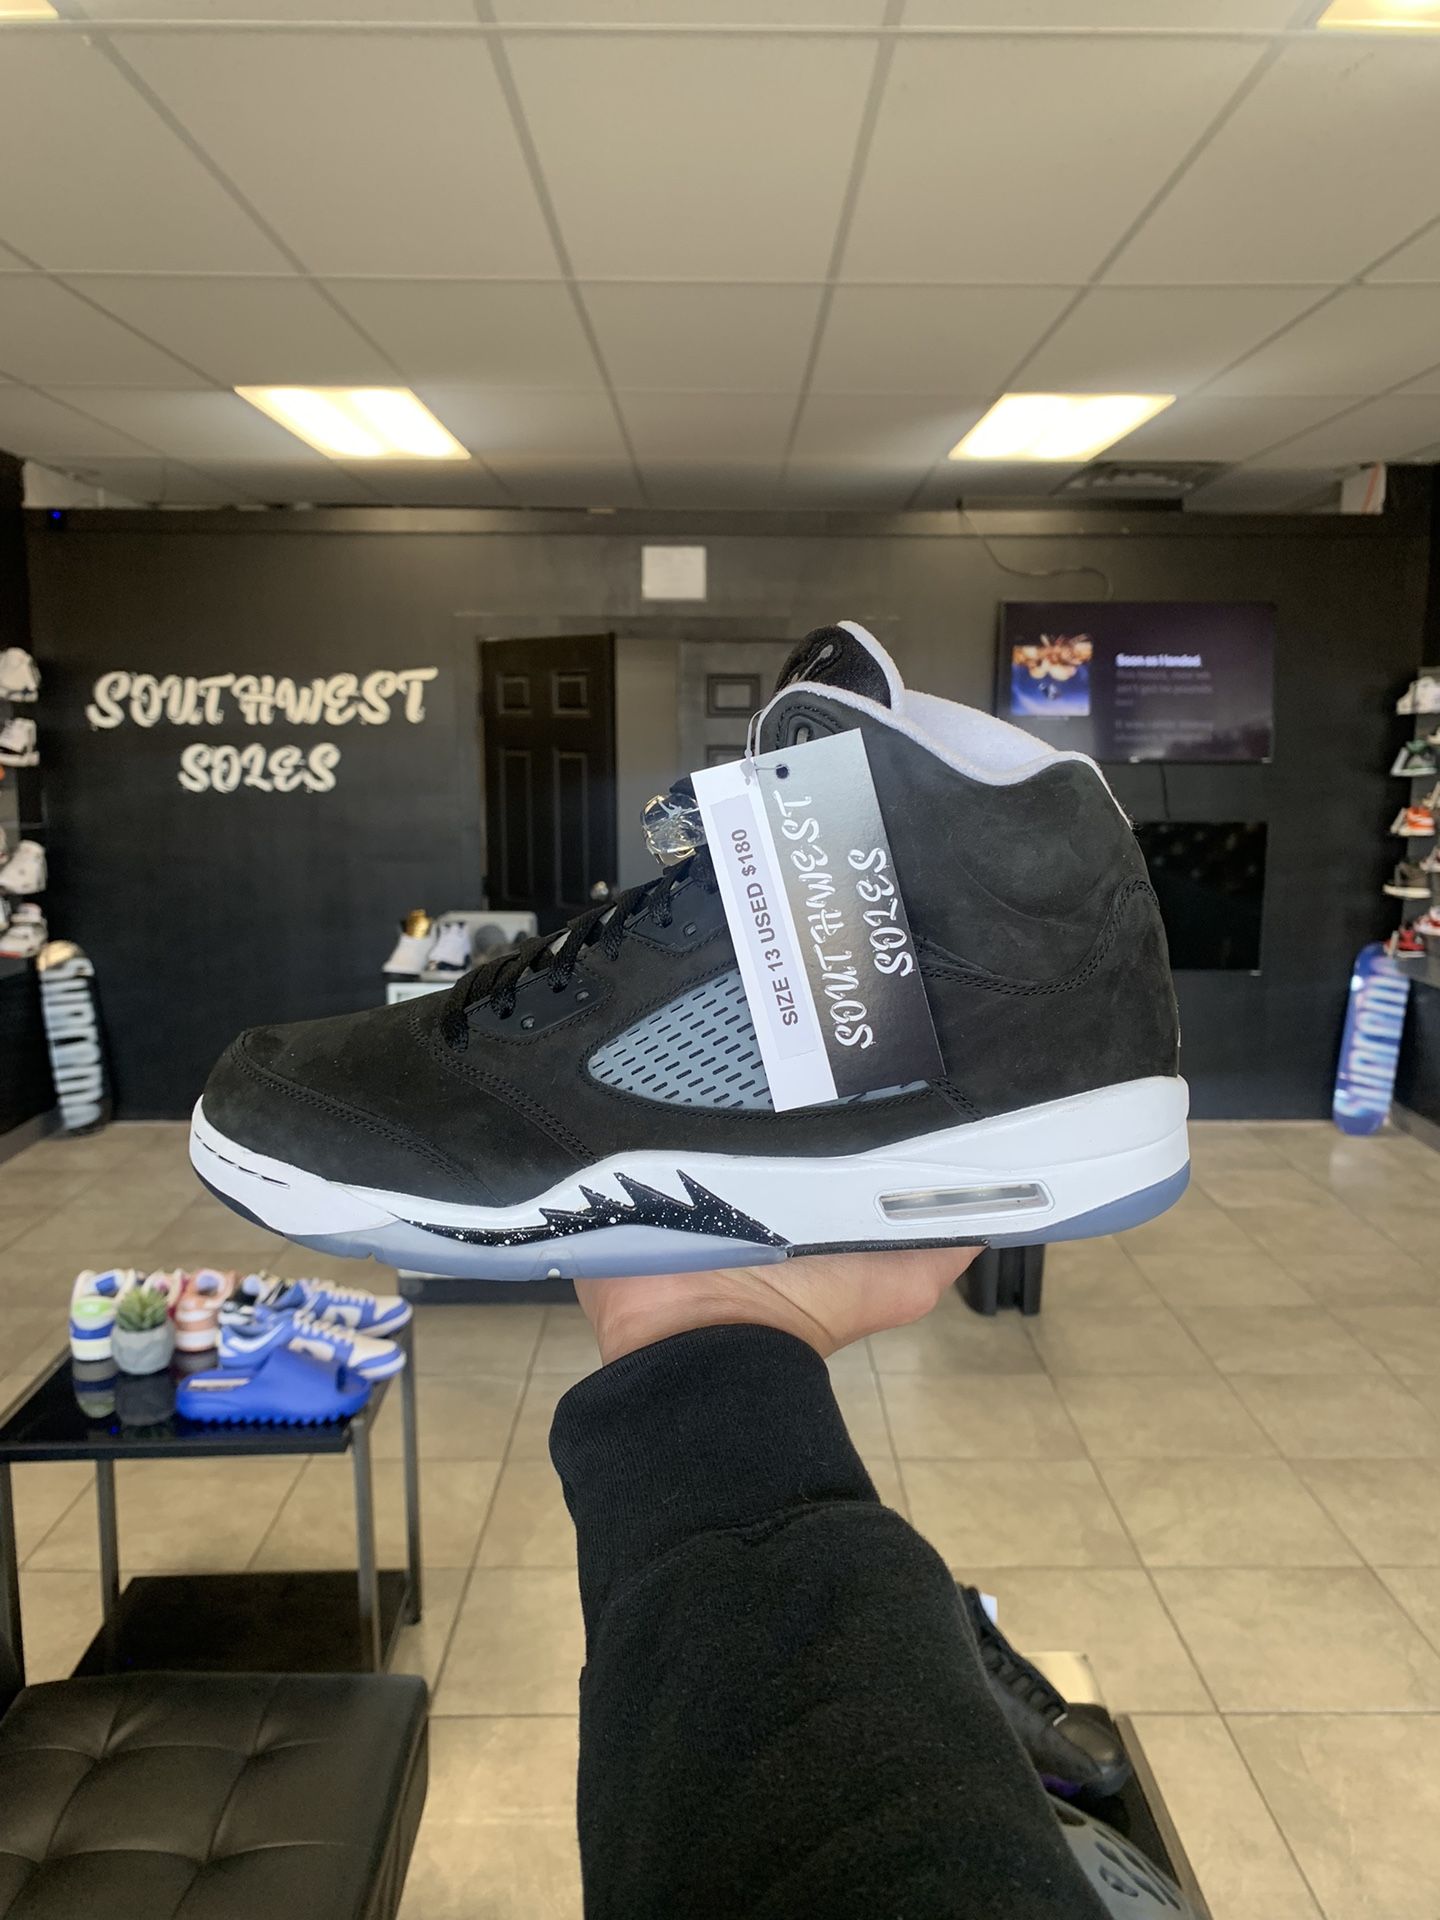 Jordan 5 Moonlight Size 13 Available In Store!